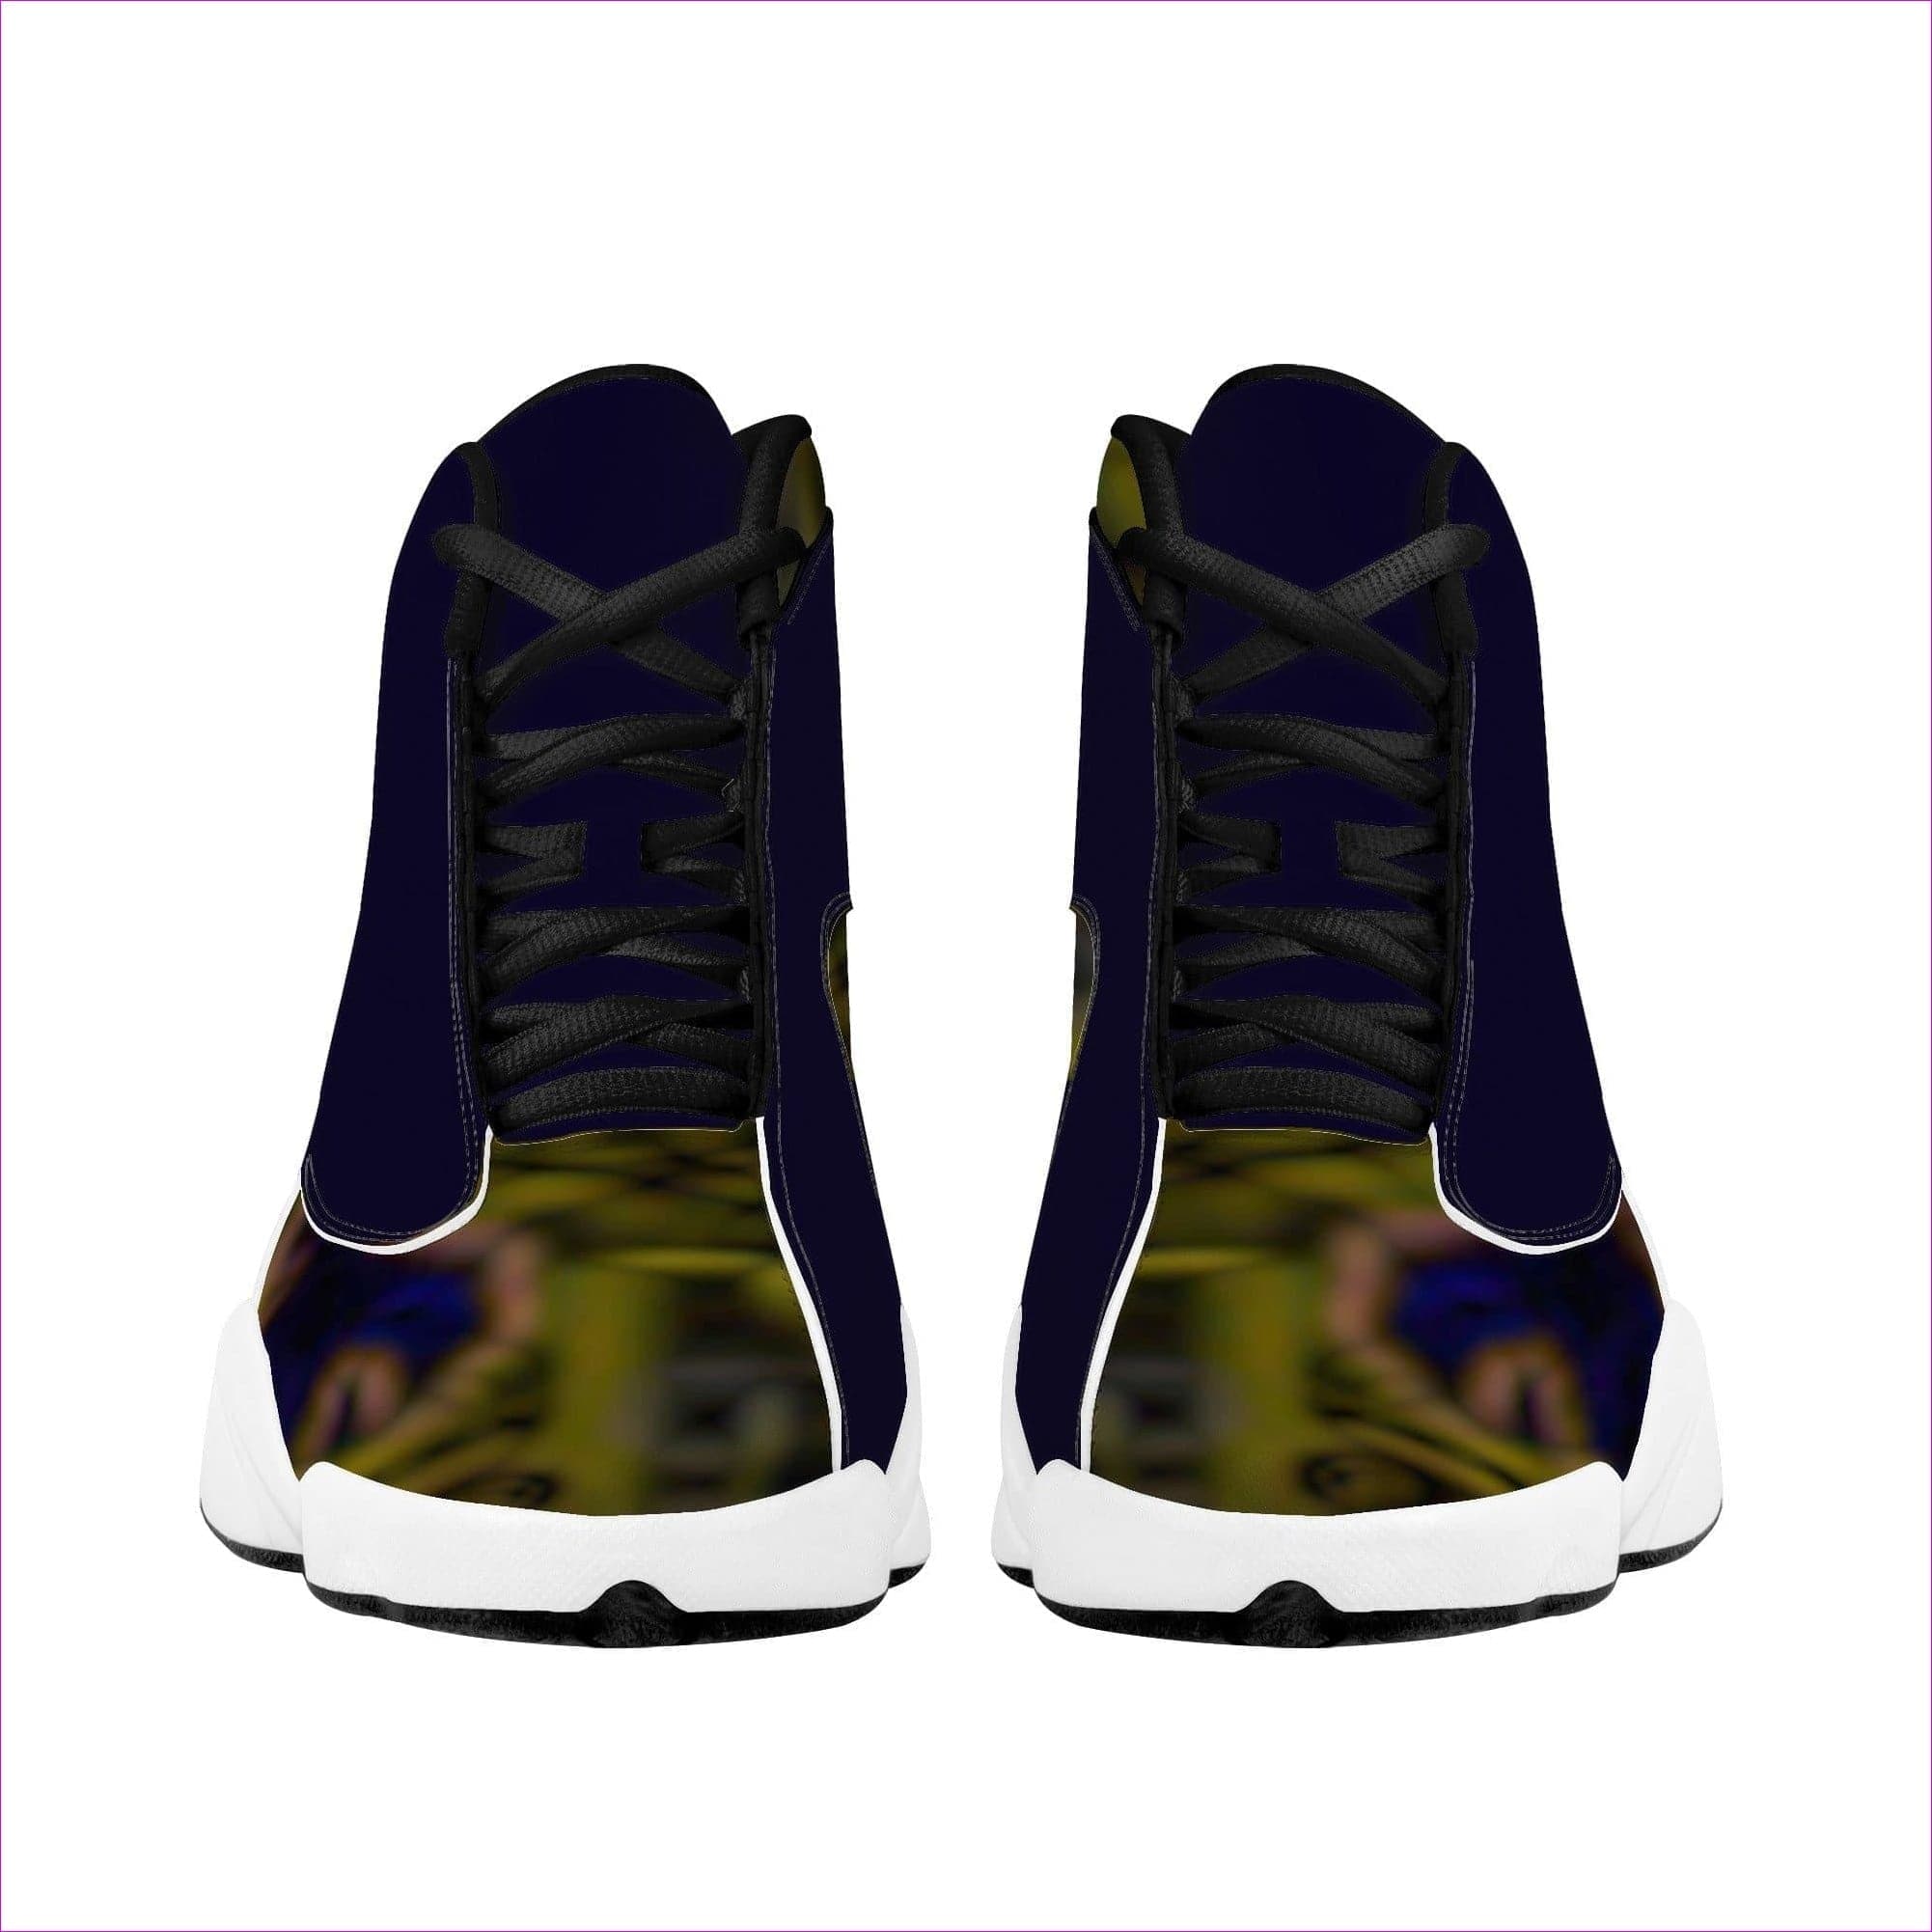 Tribalist 2 Basketball Shoes - unisex shoes at TFC&H Co.